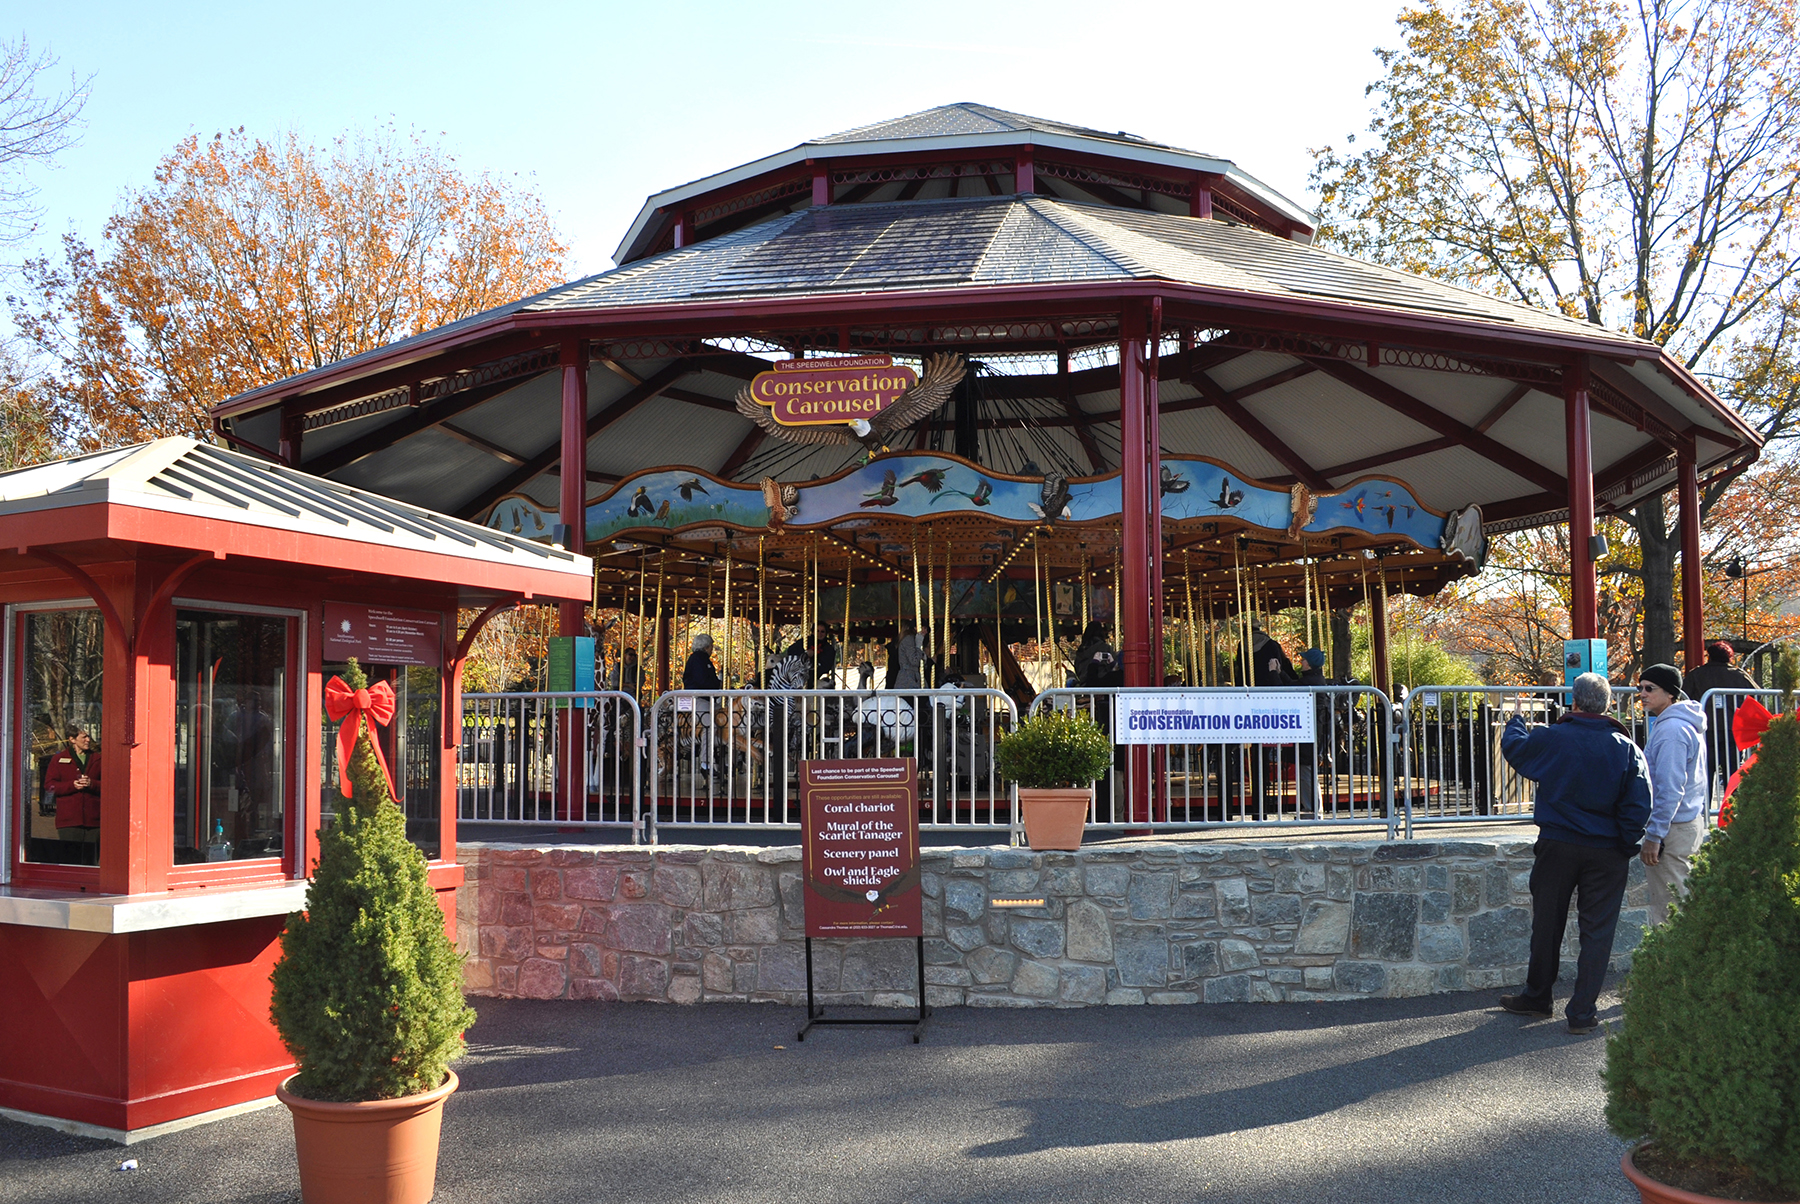 Speedwell Foundation Conservation Carousel